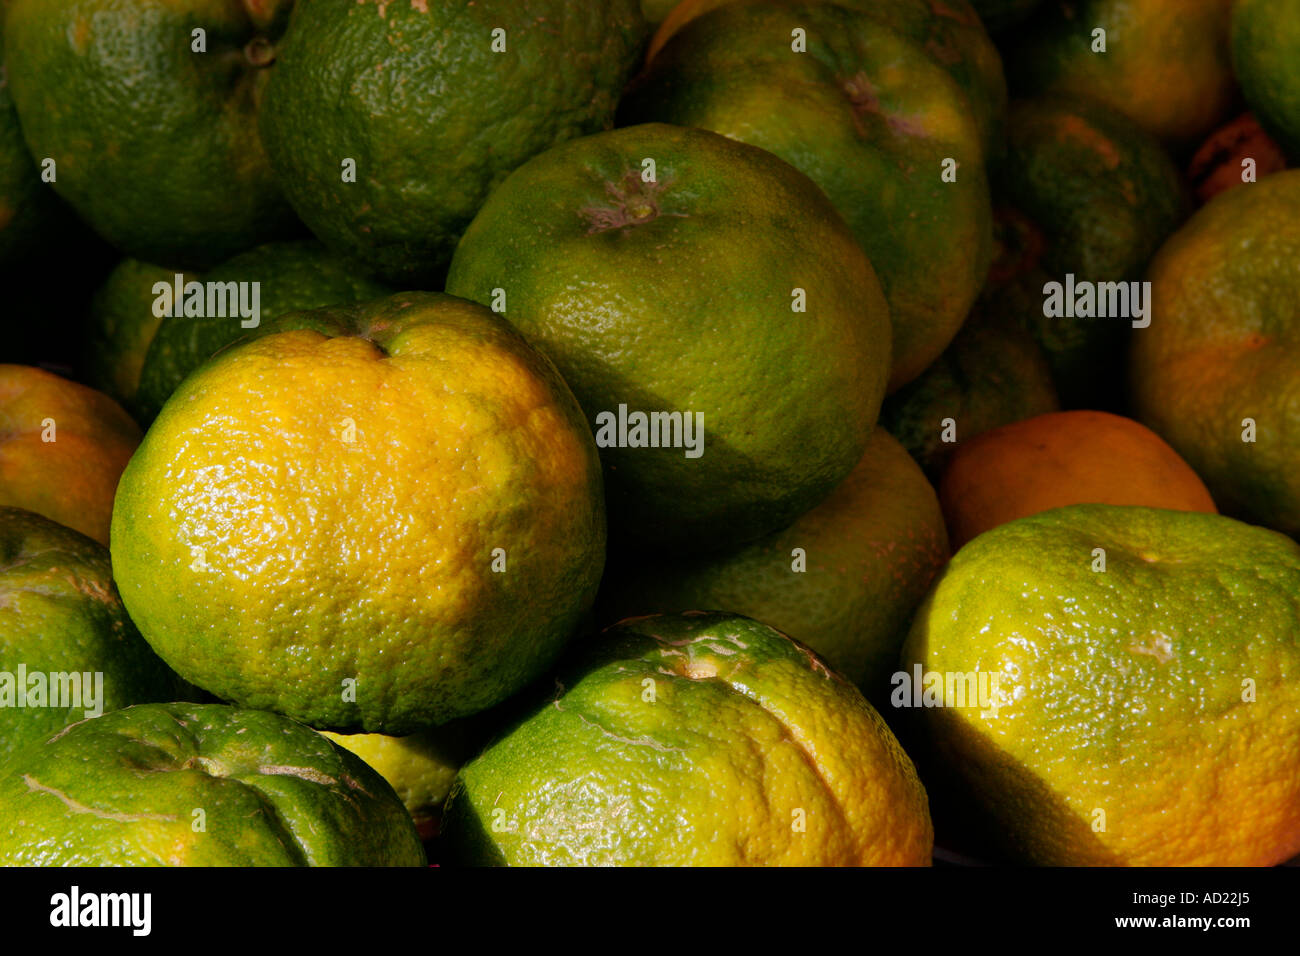 Oranges are the fruit from the City of Nagpur in Maharashtra India Stock Photo